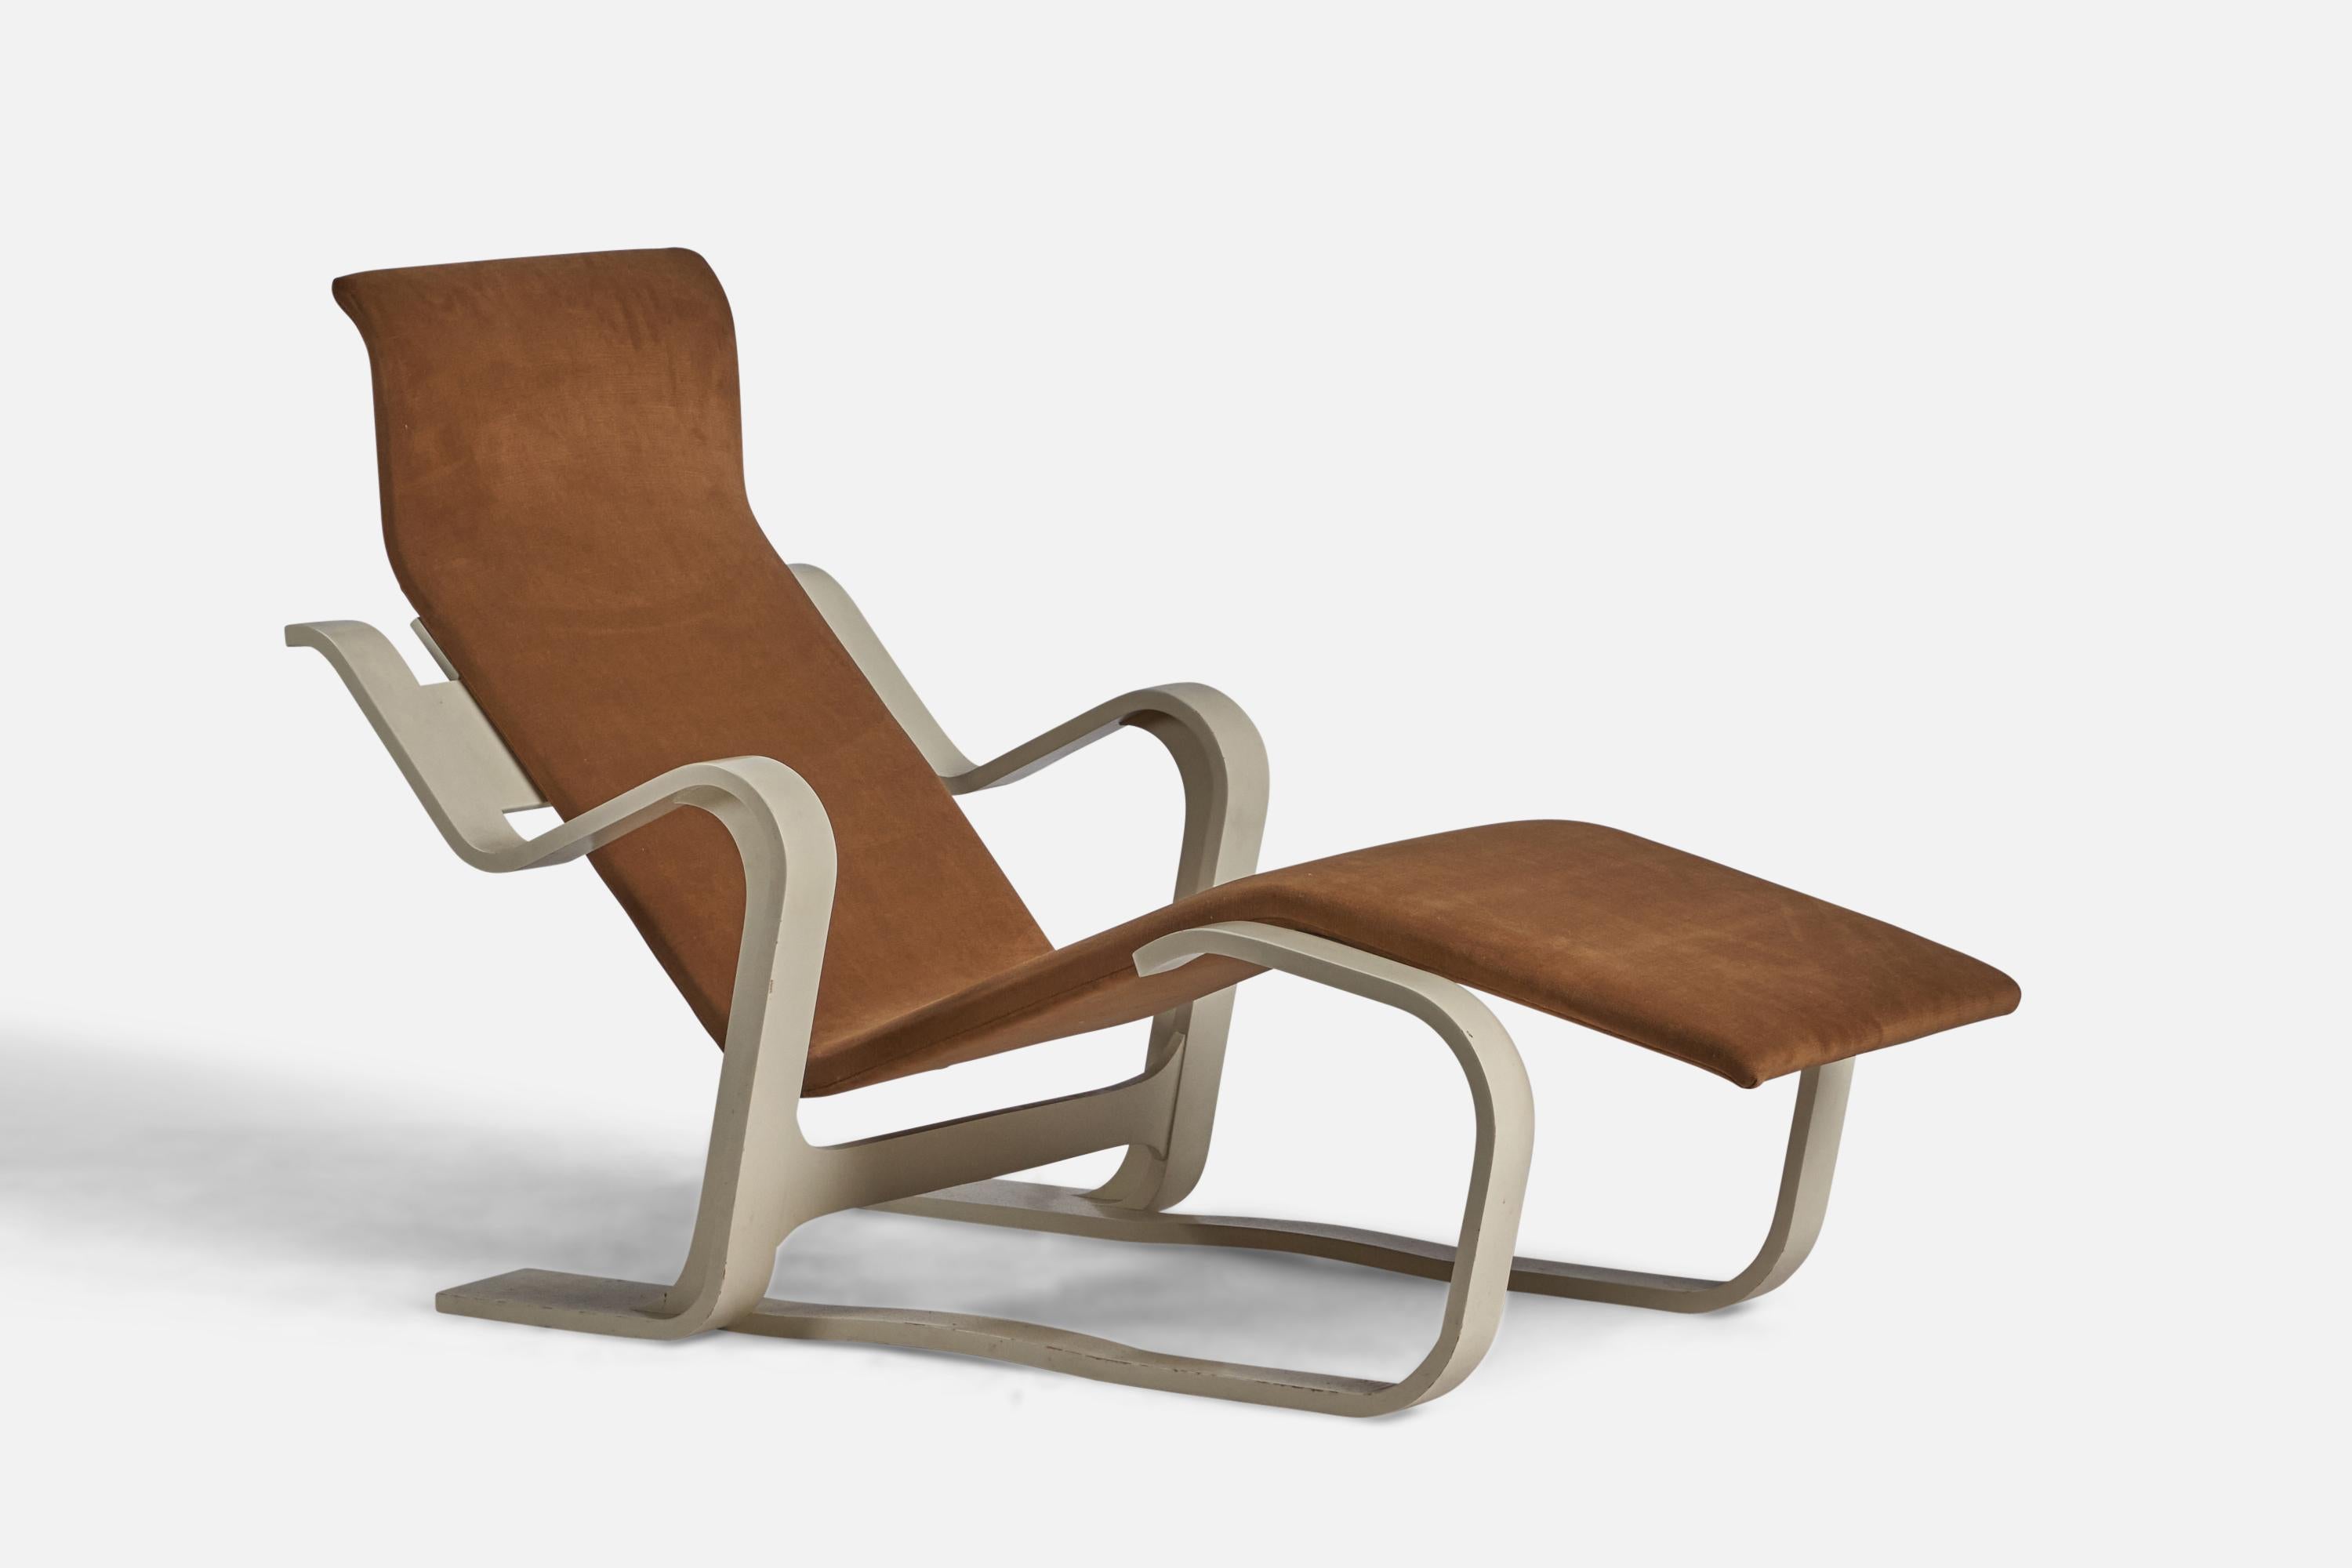 A white-lacquered wood and brown velvet fabric chaise longue designed by Marcel Breuer and produced by Knoll International, c. 1960s.
Seat height: 8.75”